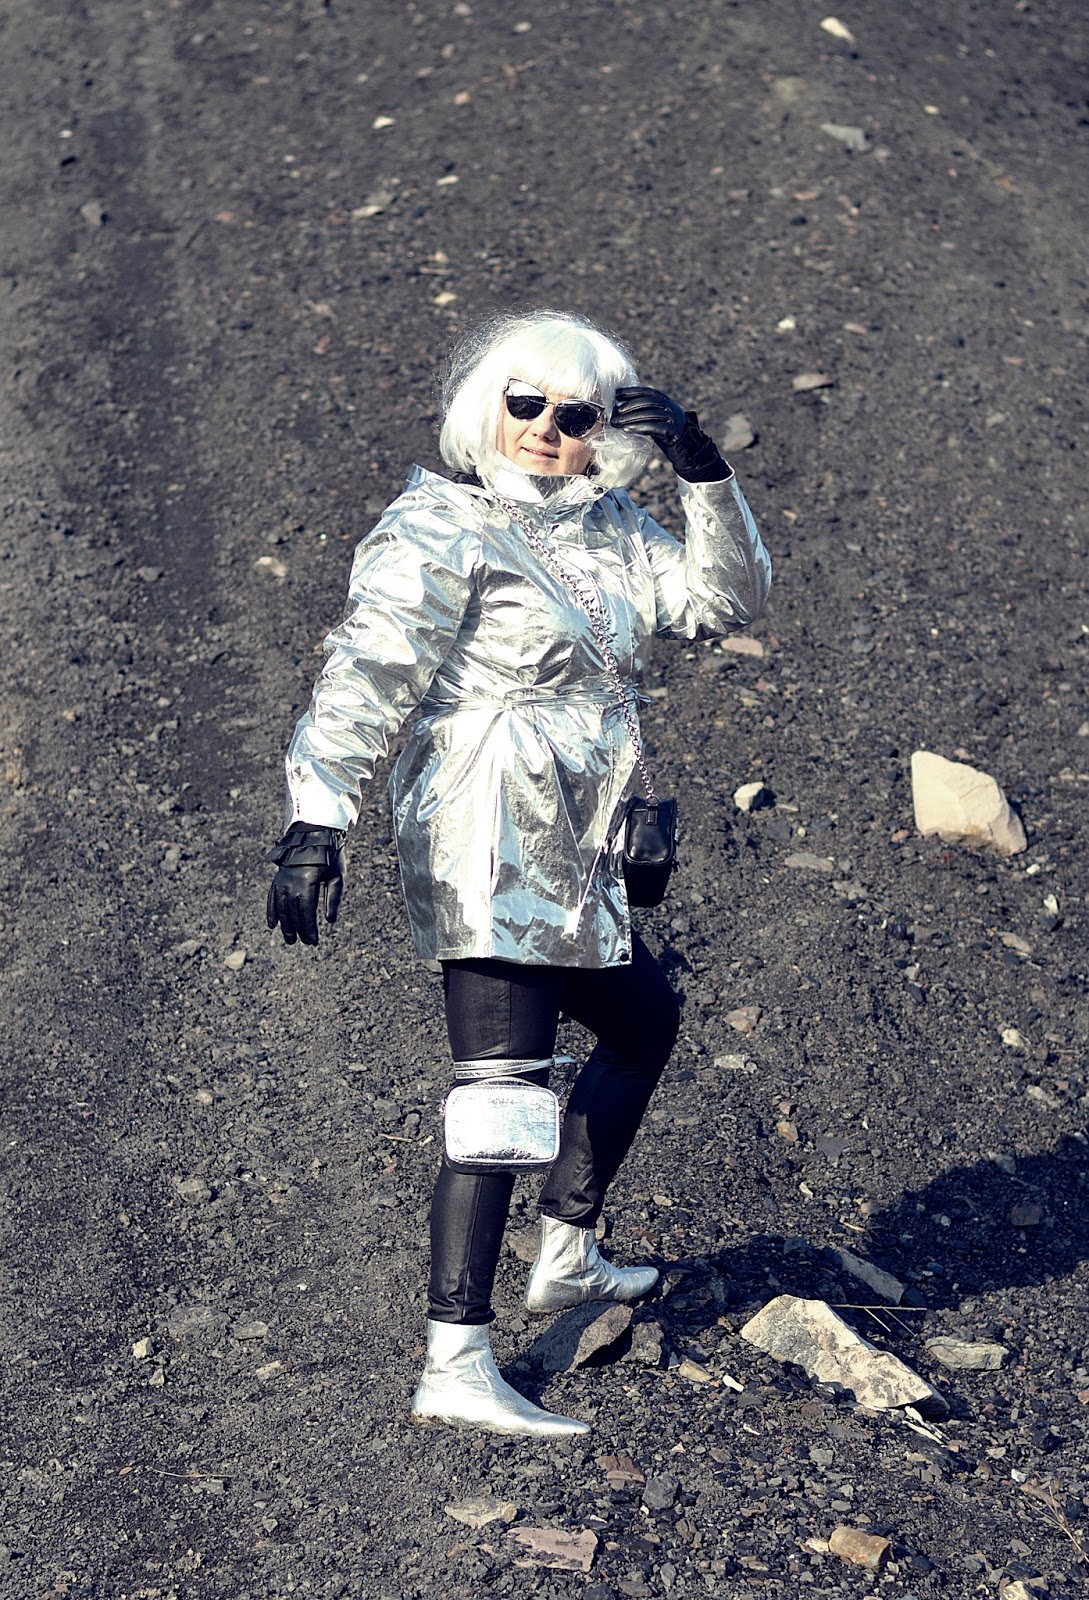 Silver jacket, silver boots, silver hair  